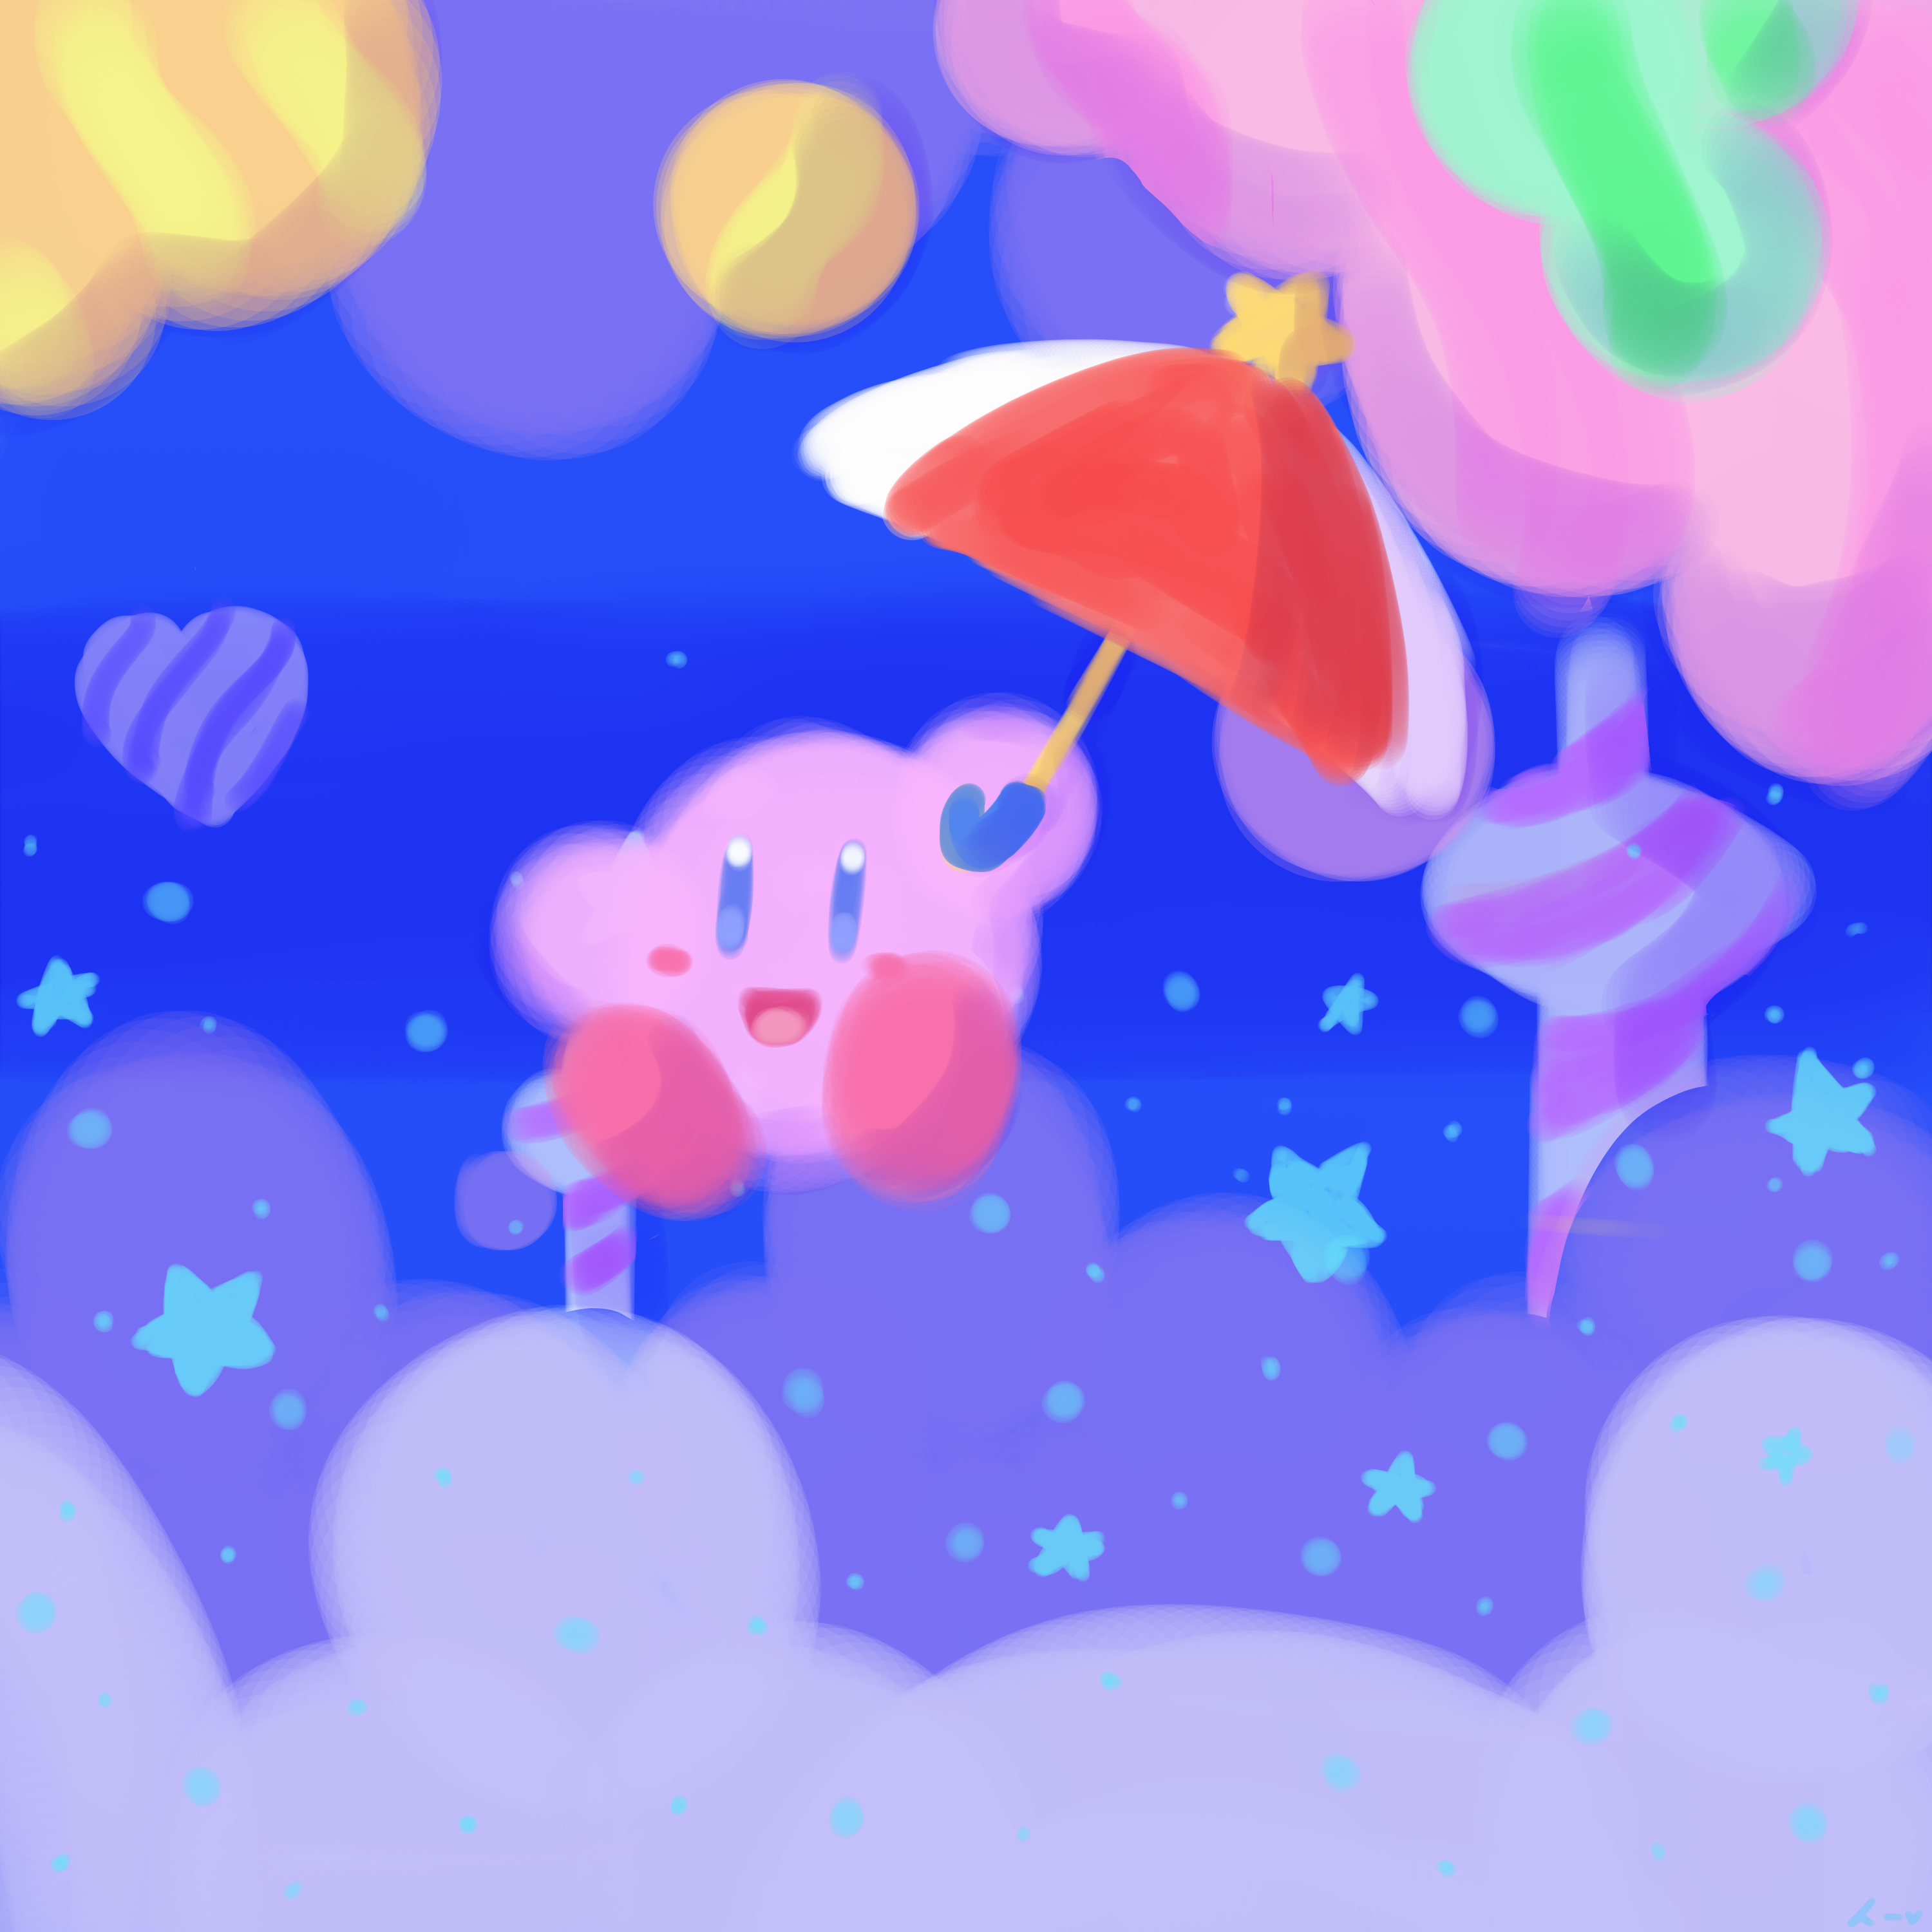 I Wanted To Draw Pretty Background So Drew The Pink Puff Kirby